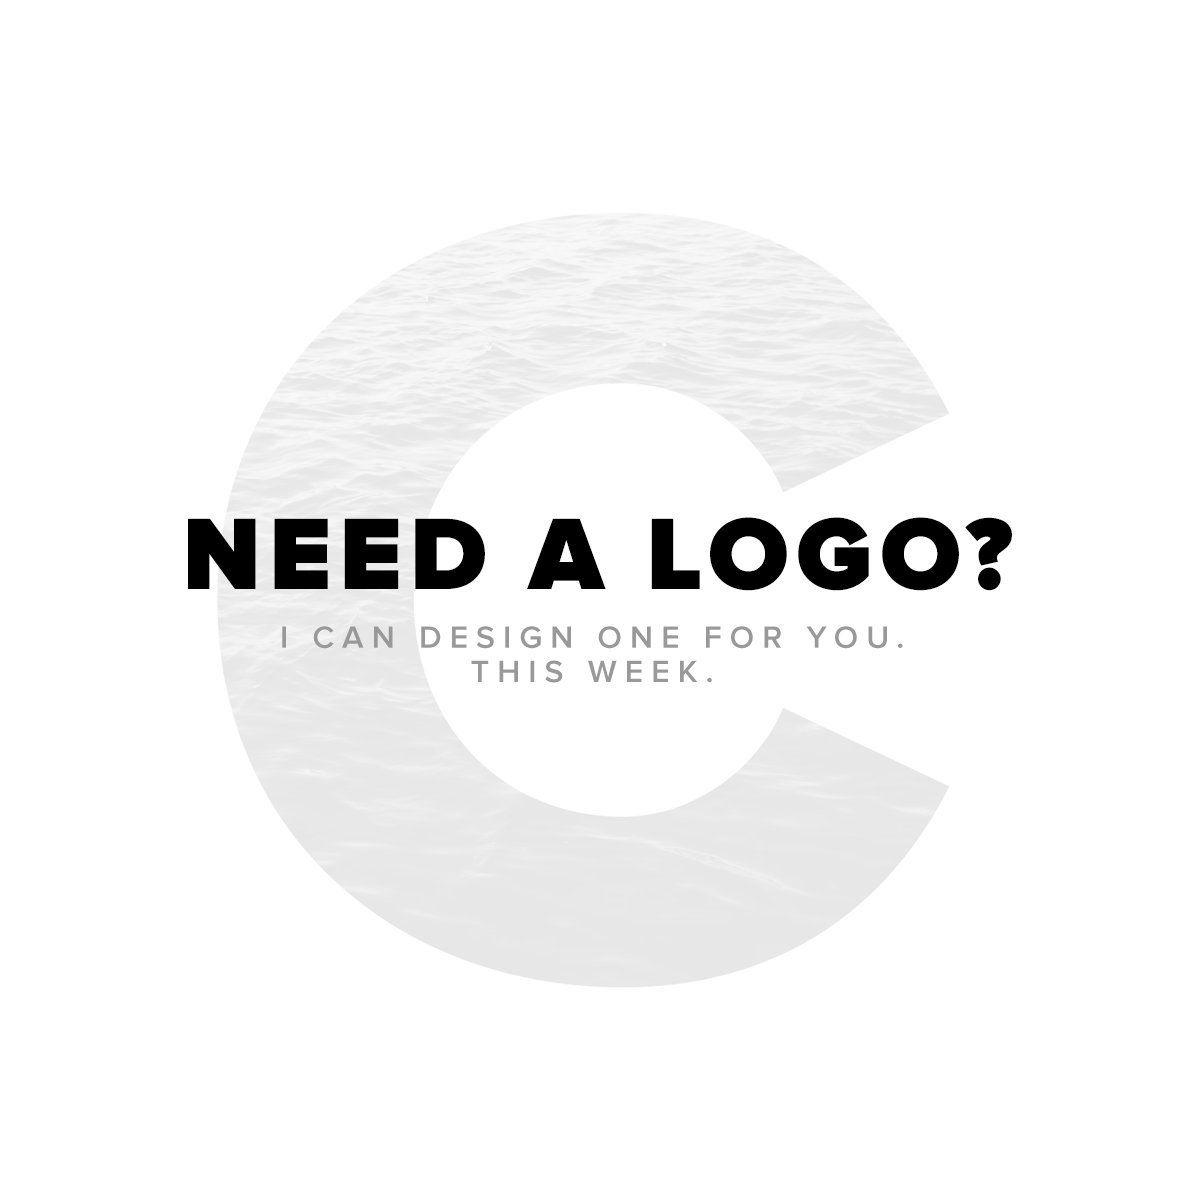 Need Money Logo - Chance Craven a logo this week? You're in luck! I